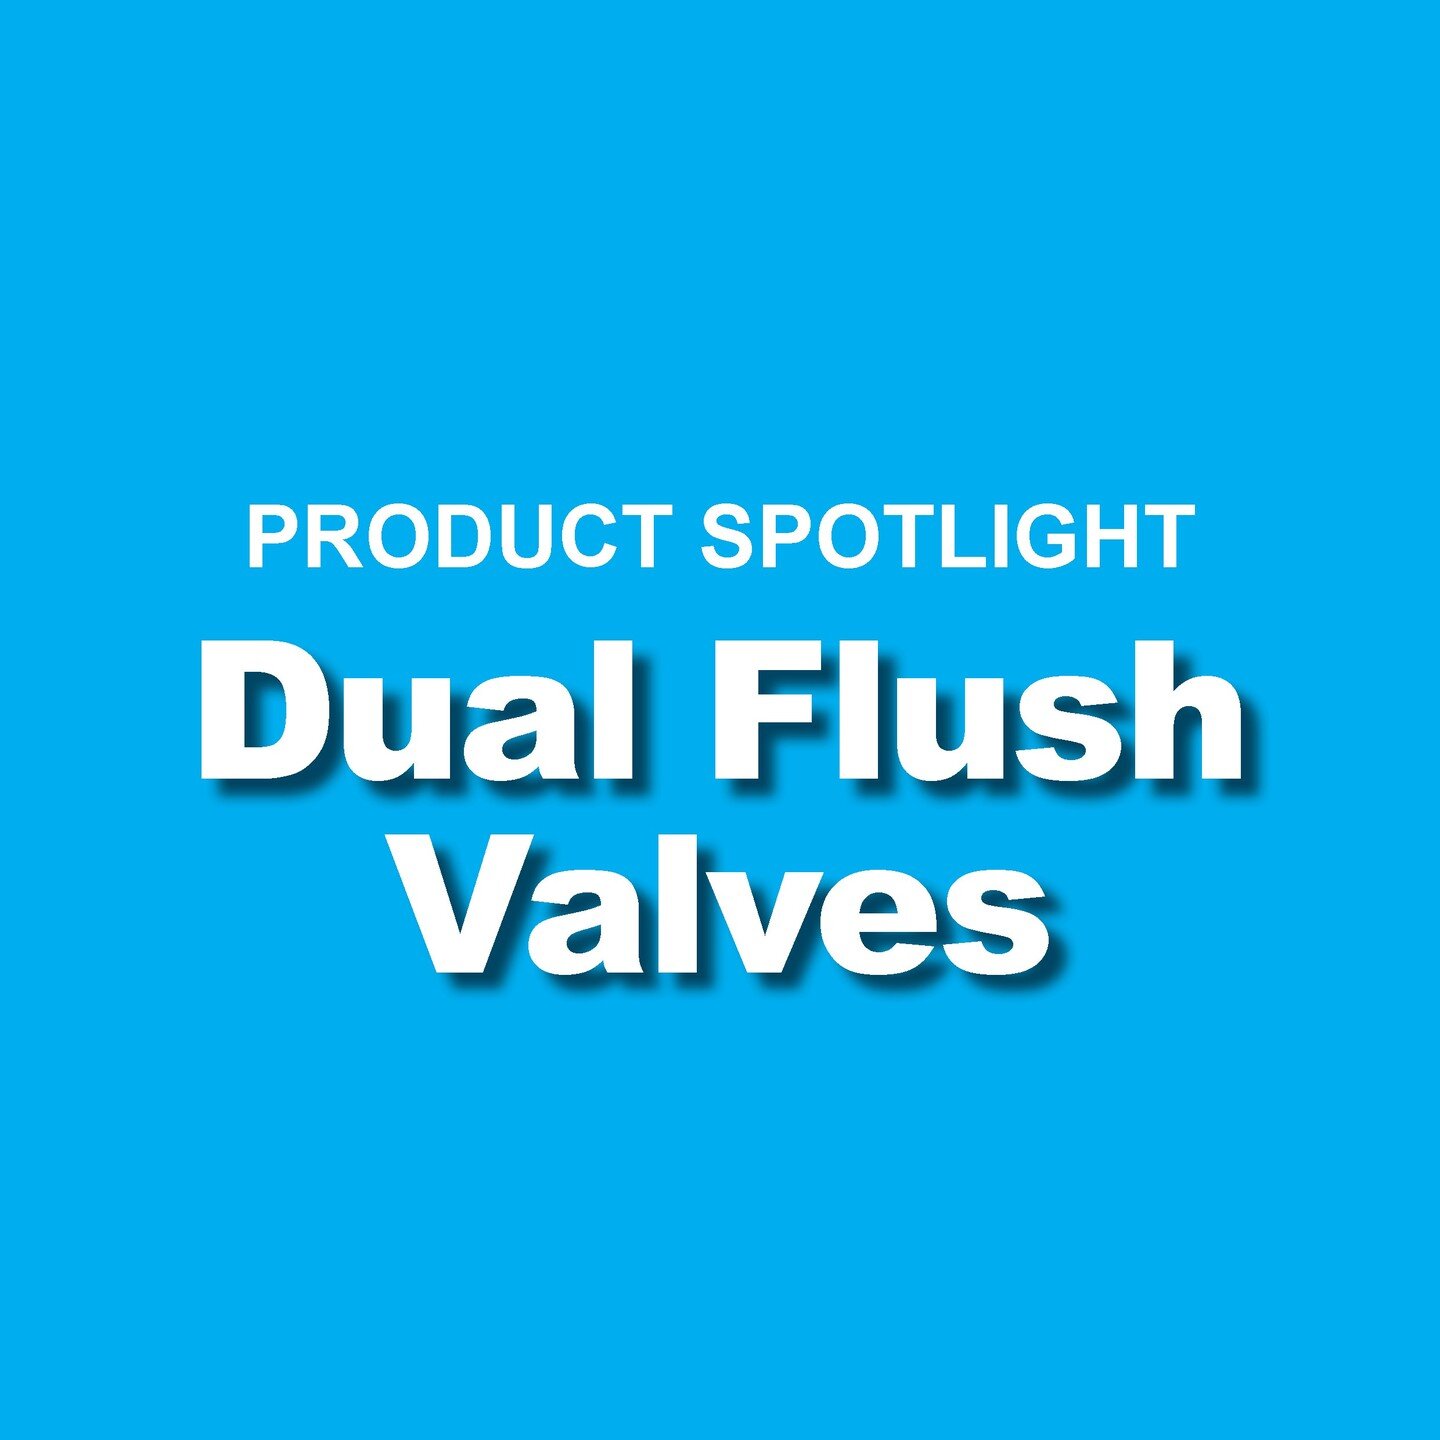 PRODUCT SPOTLIGHT: Looking to reduce water volume by up to 30 percent? Choose Sloan Dual Flush Valves / Flushometers, the first manually-activated dual-flush flushometer in the commercial marketplace.
(Photo credit: Thanks @sloan_valve)
https://www.m